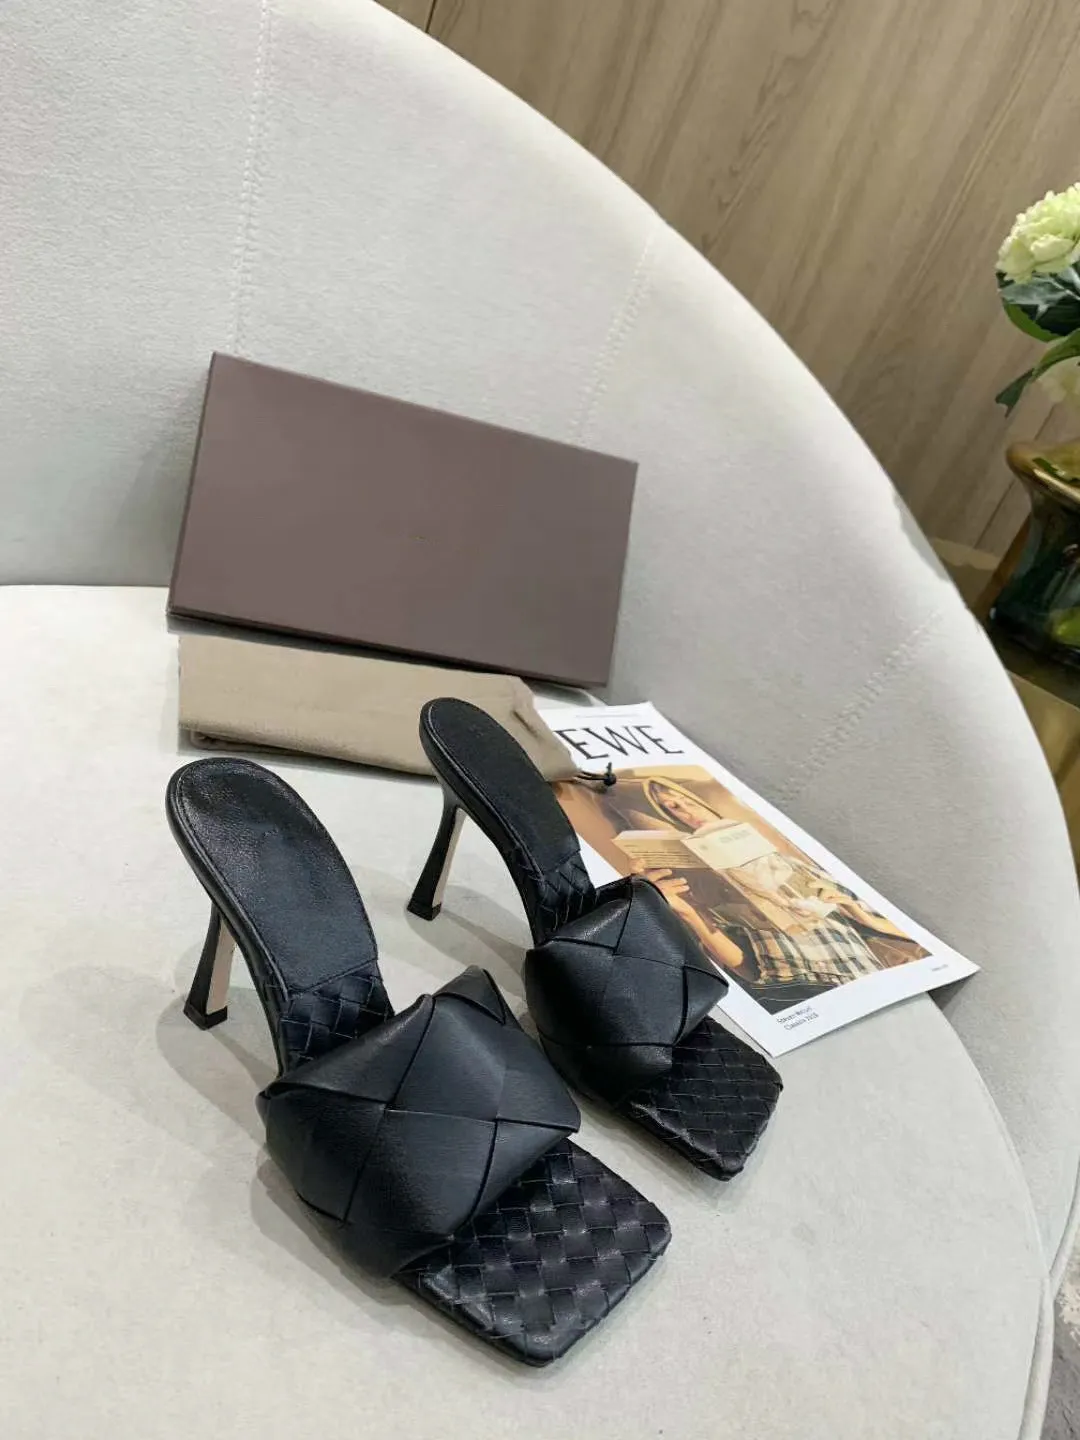 2020 Summer The latest leather slippers Luxury Matte leather checked women shoes open-toed women flat heel Sandals beach Shoes